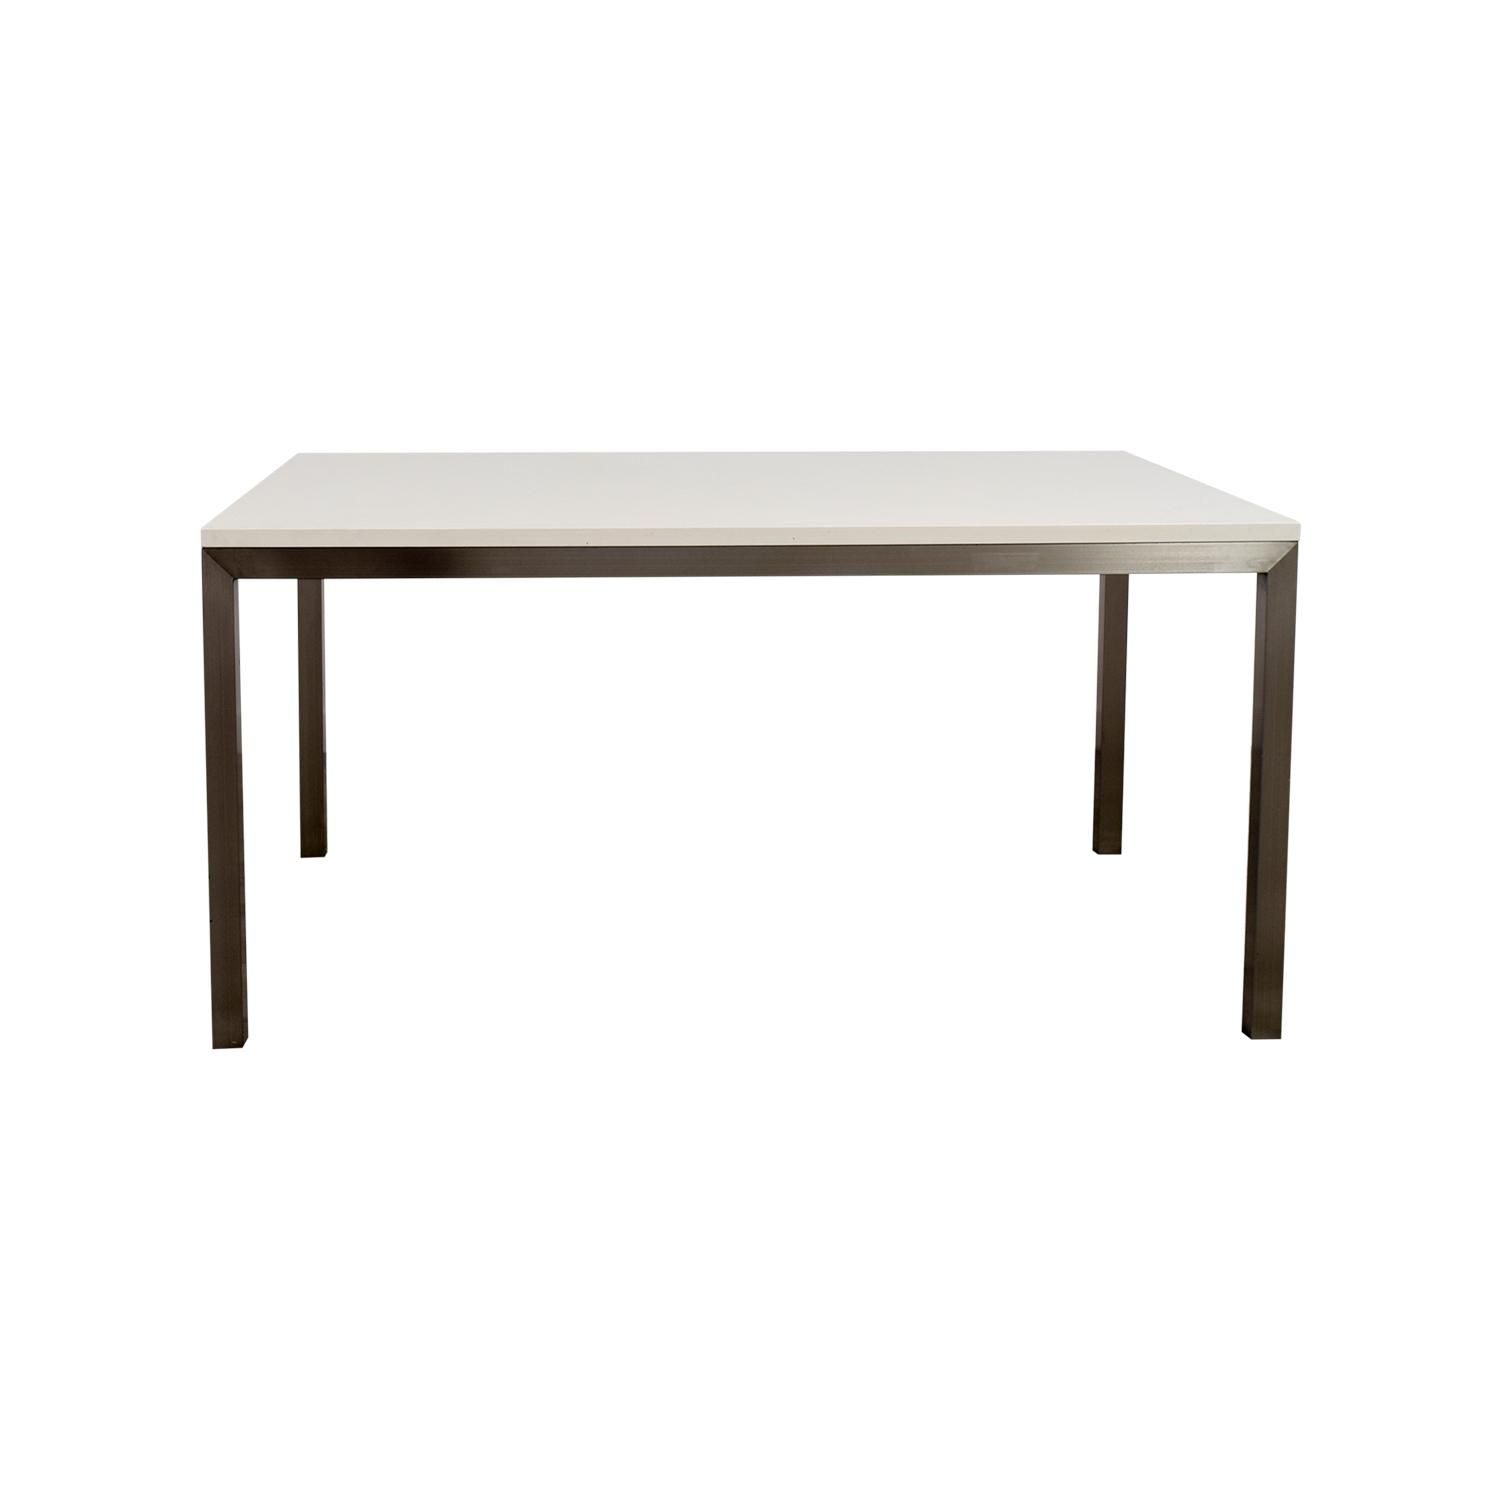 Crate And Barrel Coupon Code Throughout Crate And Barrel Sofa Tables (View 17 of 20)